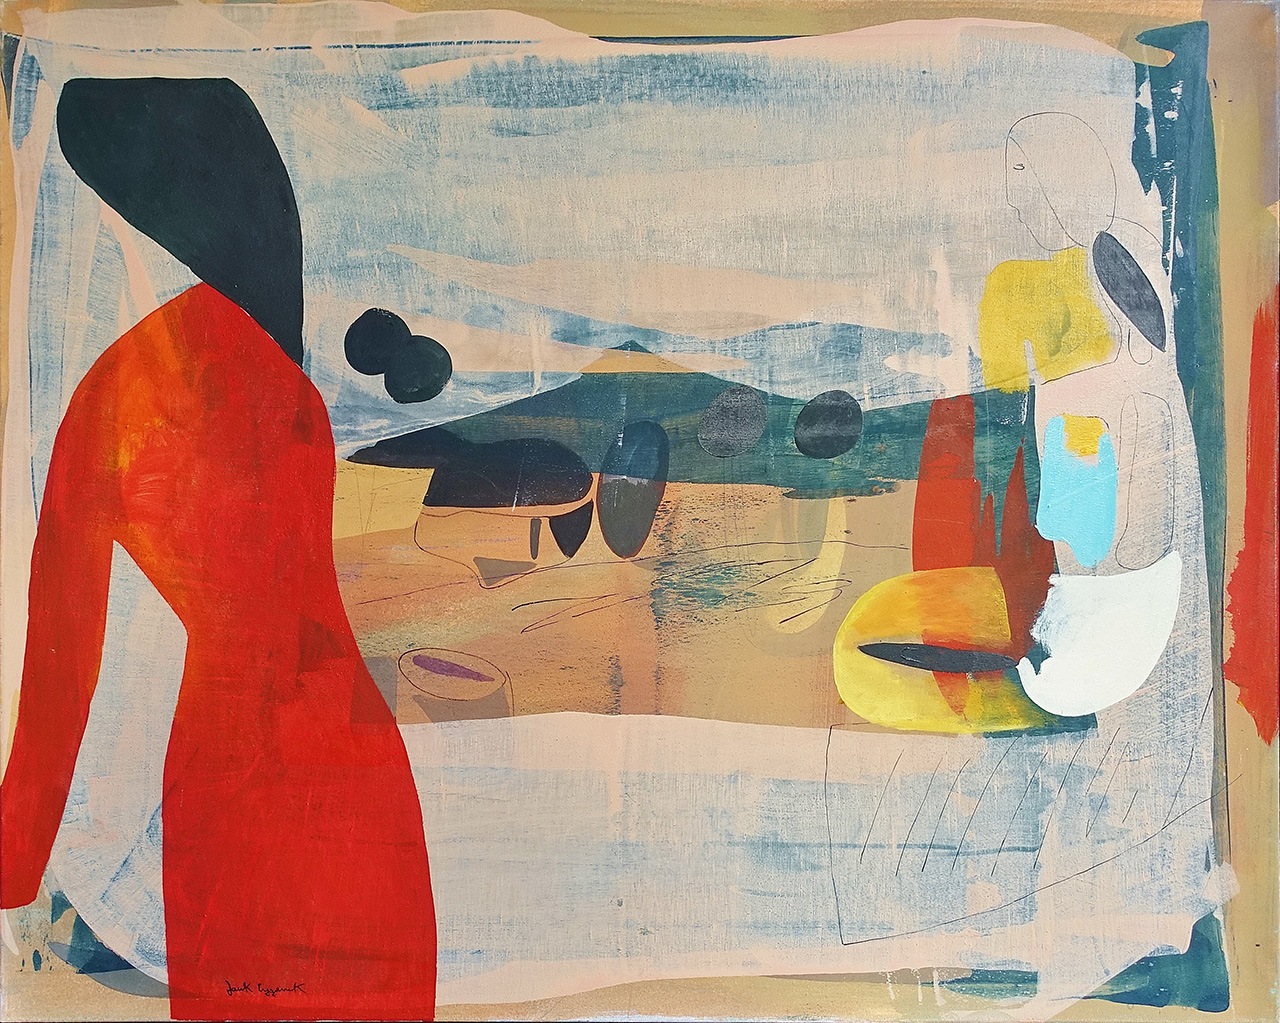 Jacek Cyganek - In the color of the day (Tempera on canvas | Size: 108 x 88 cm | Price: 5500 PLN)